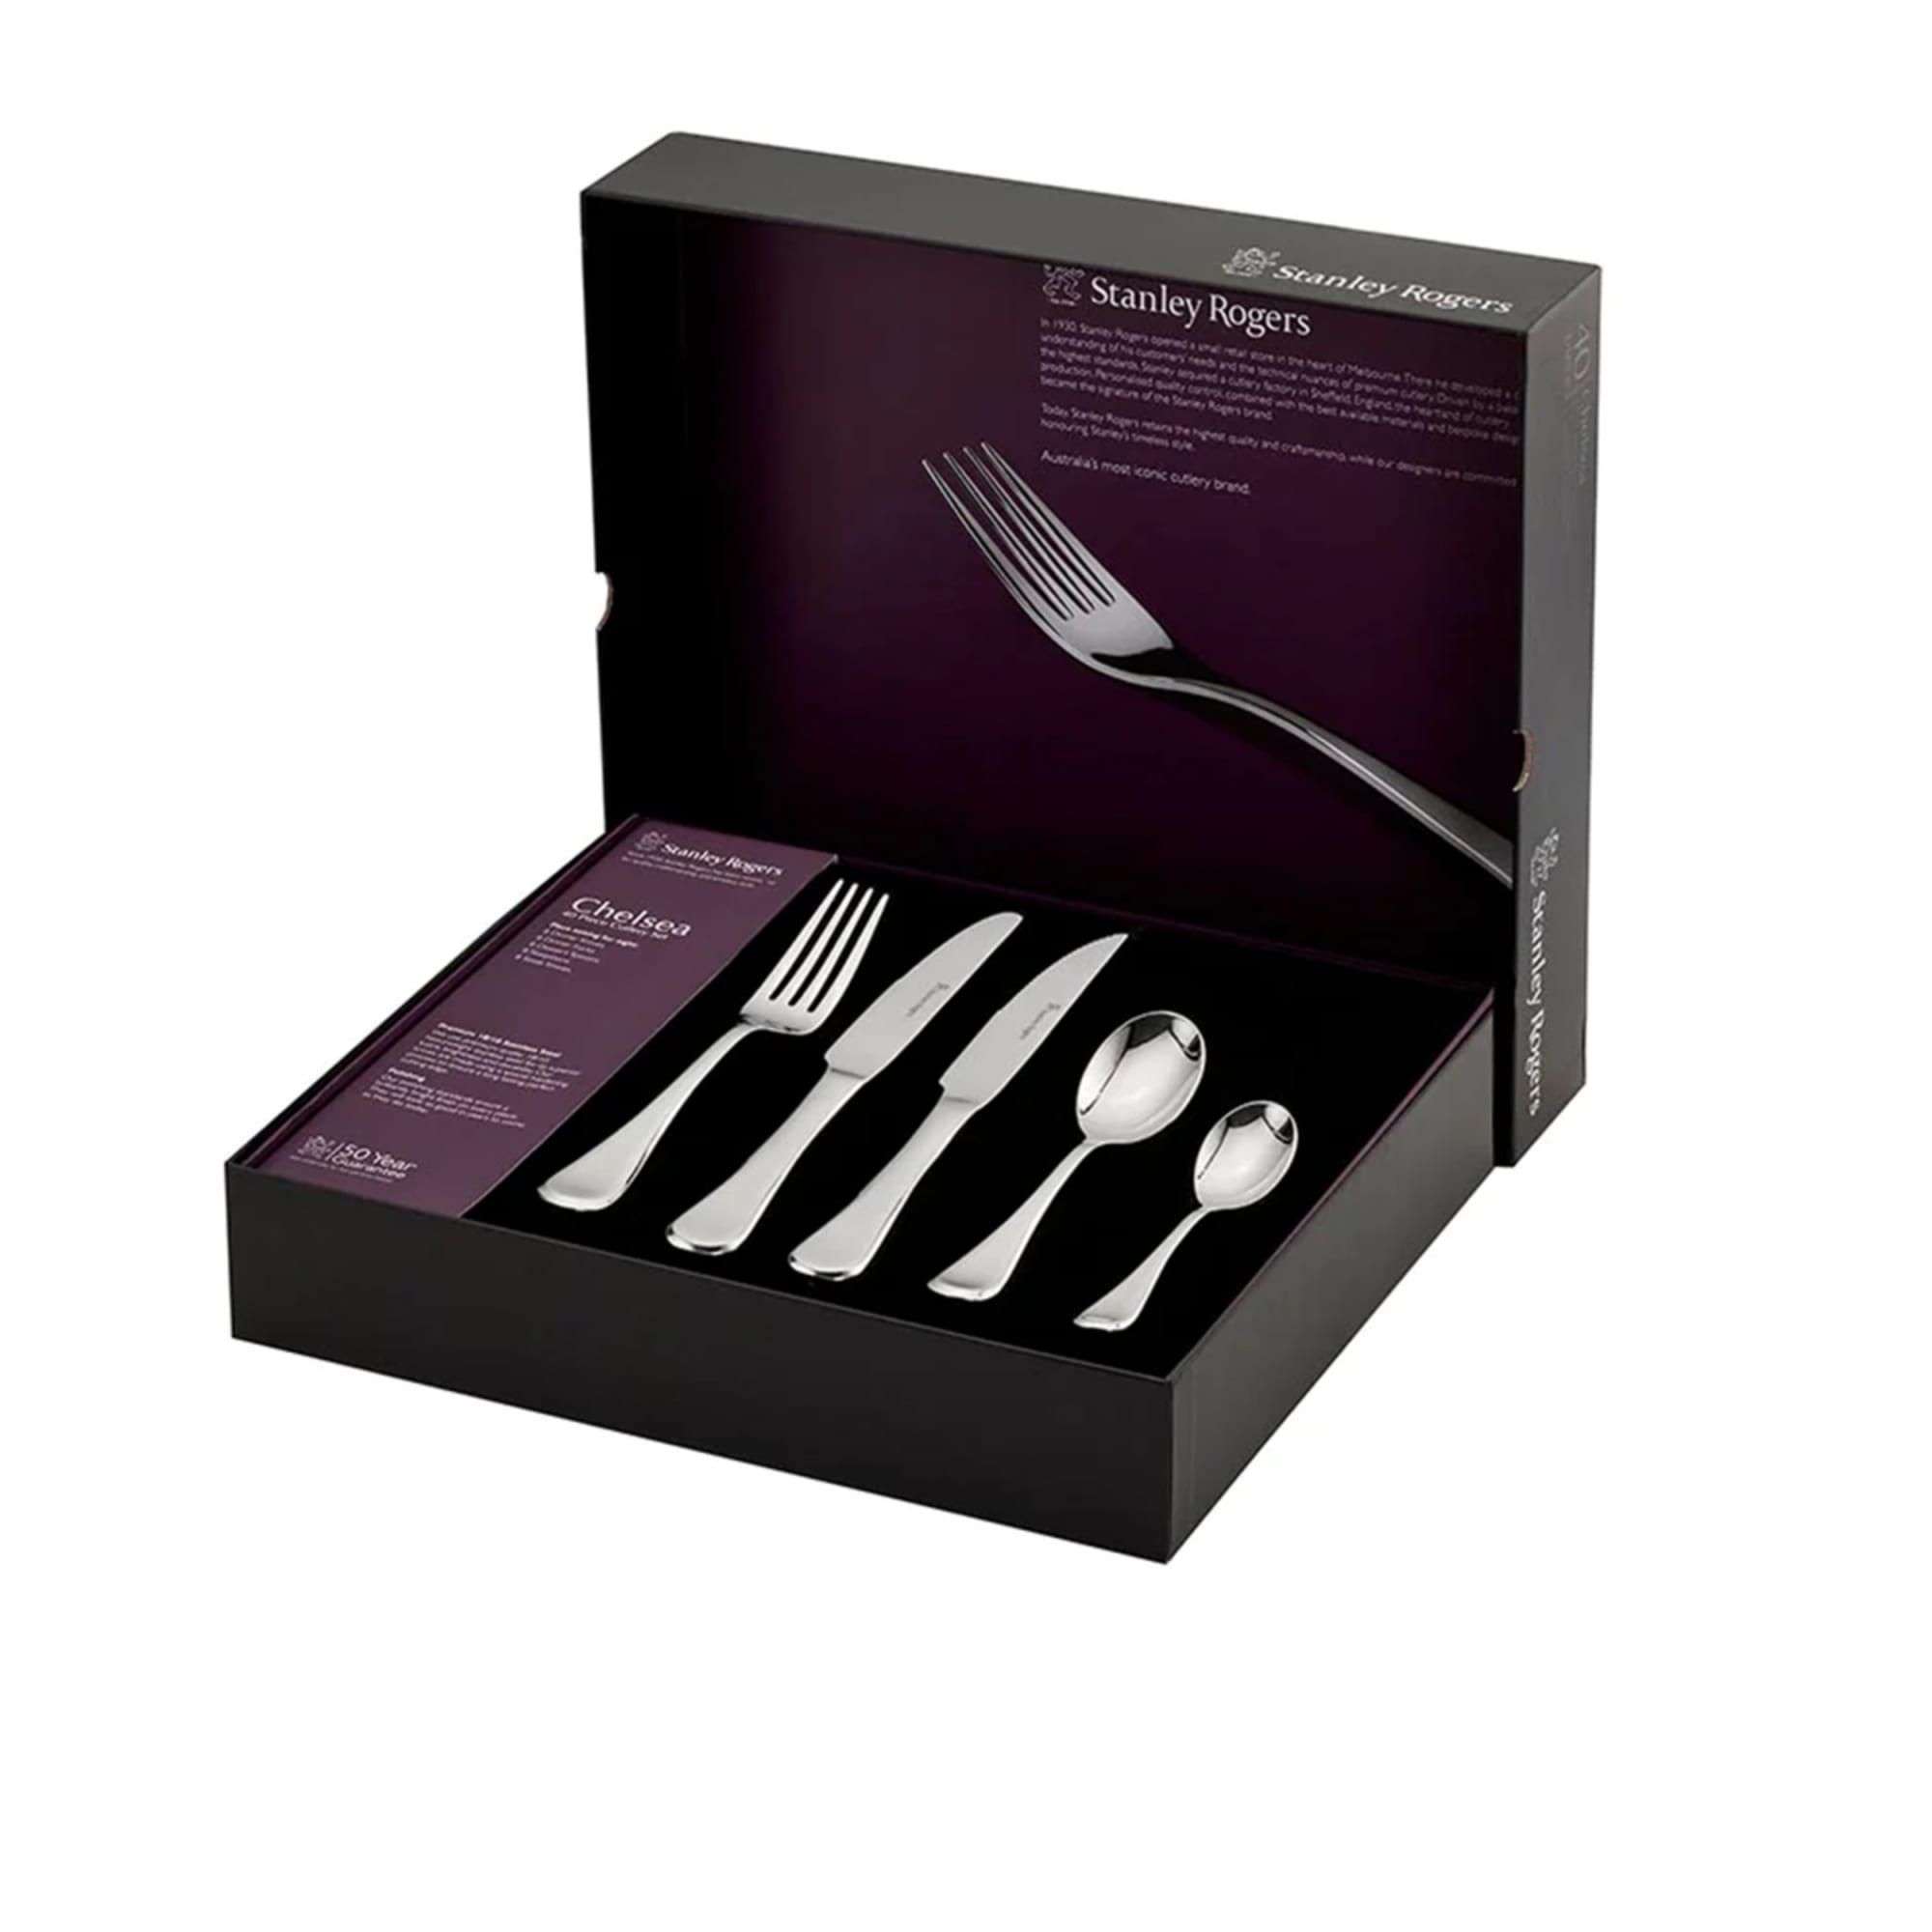 Stanley Rogers Chelsea Cutlery Set 40pc Silver Image 5